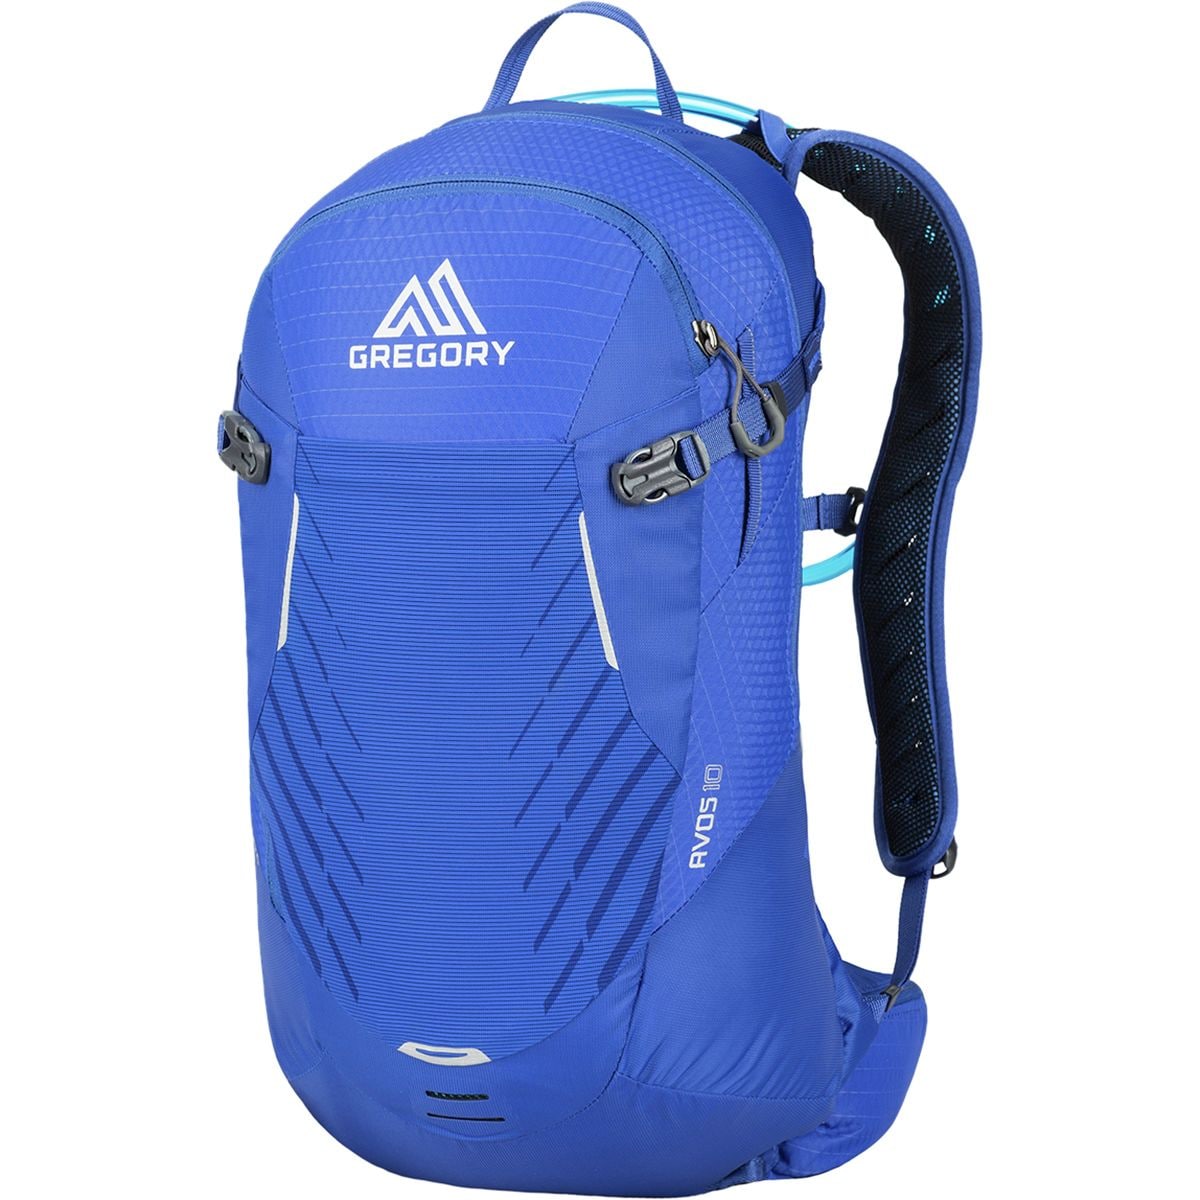 Photos - Backpack Gregory Avos 10L Hydration  - Women's 